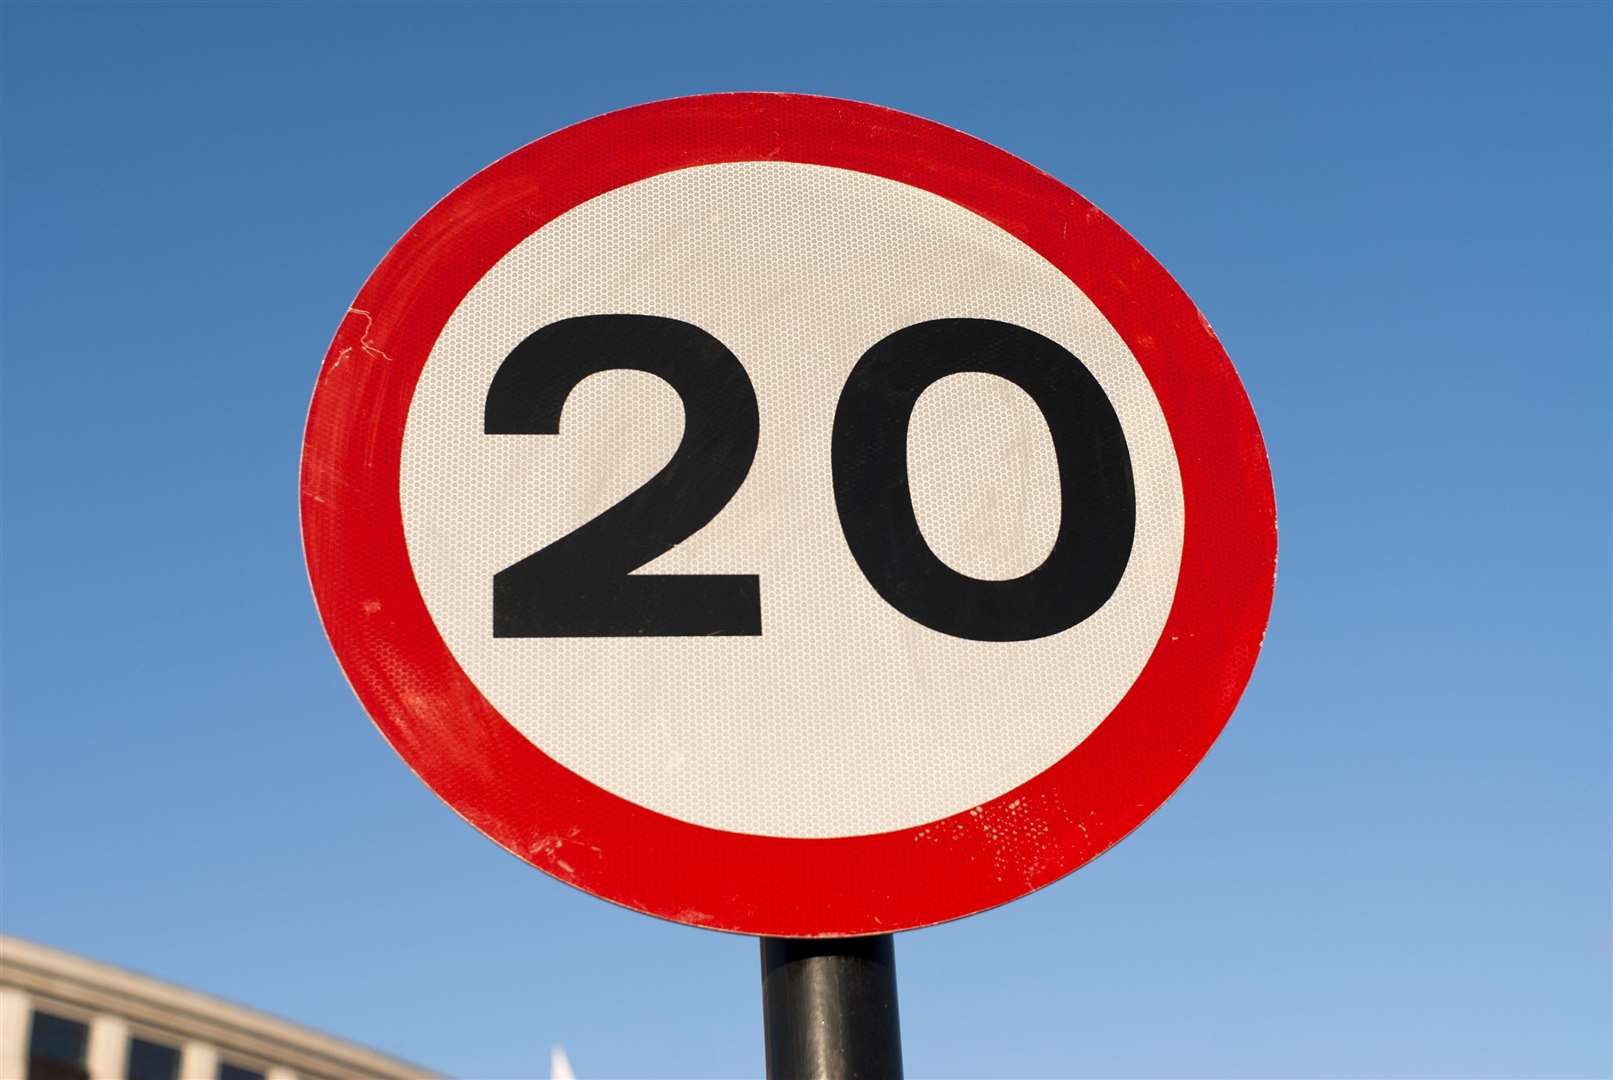 TRANSPORT SCOTLAND’S 20MPH SPEED LIMIT INITIATIVE: ENHANCING SAFETY IN HIGHLAND COMMUNITIES